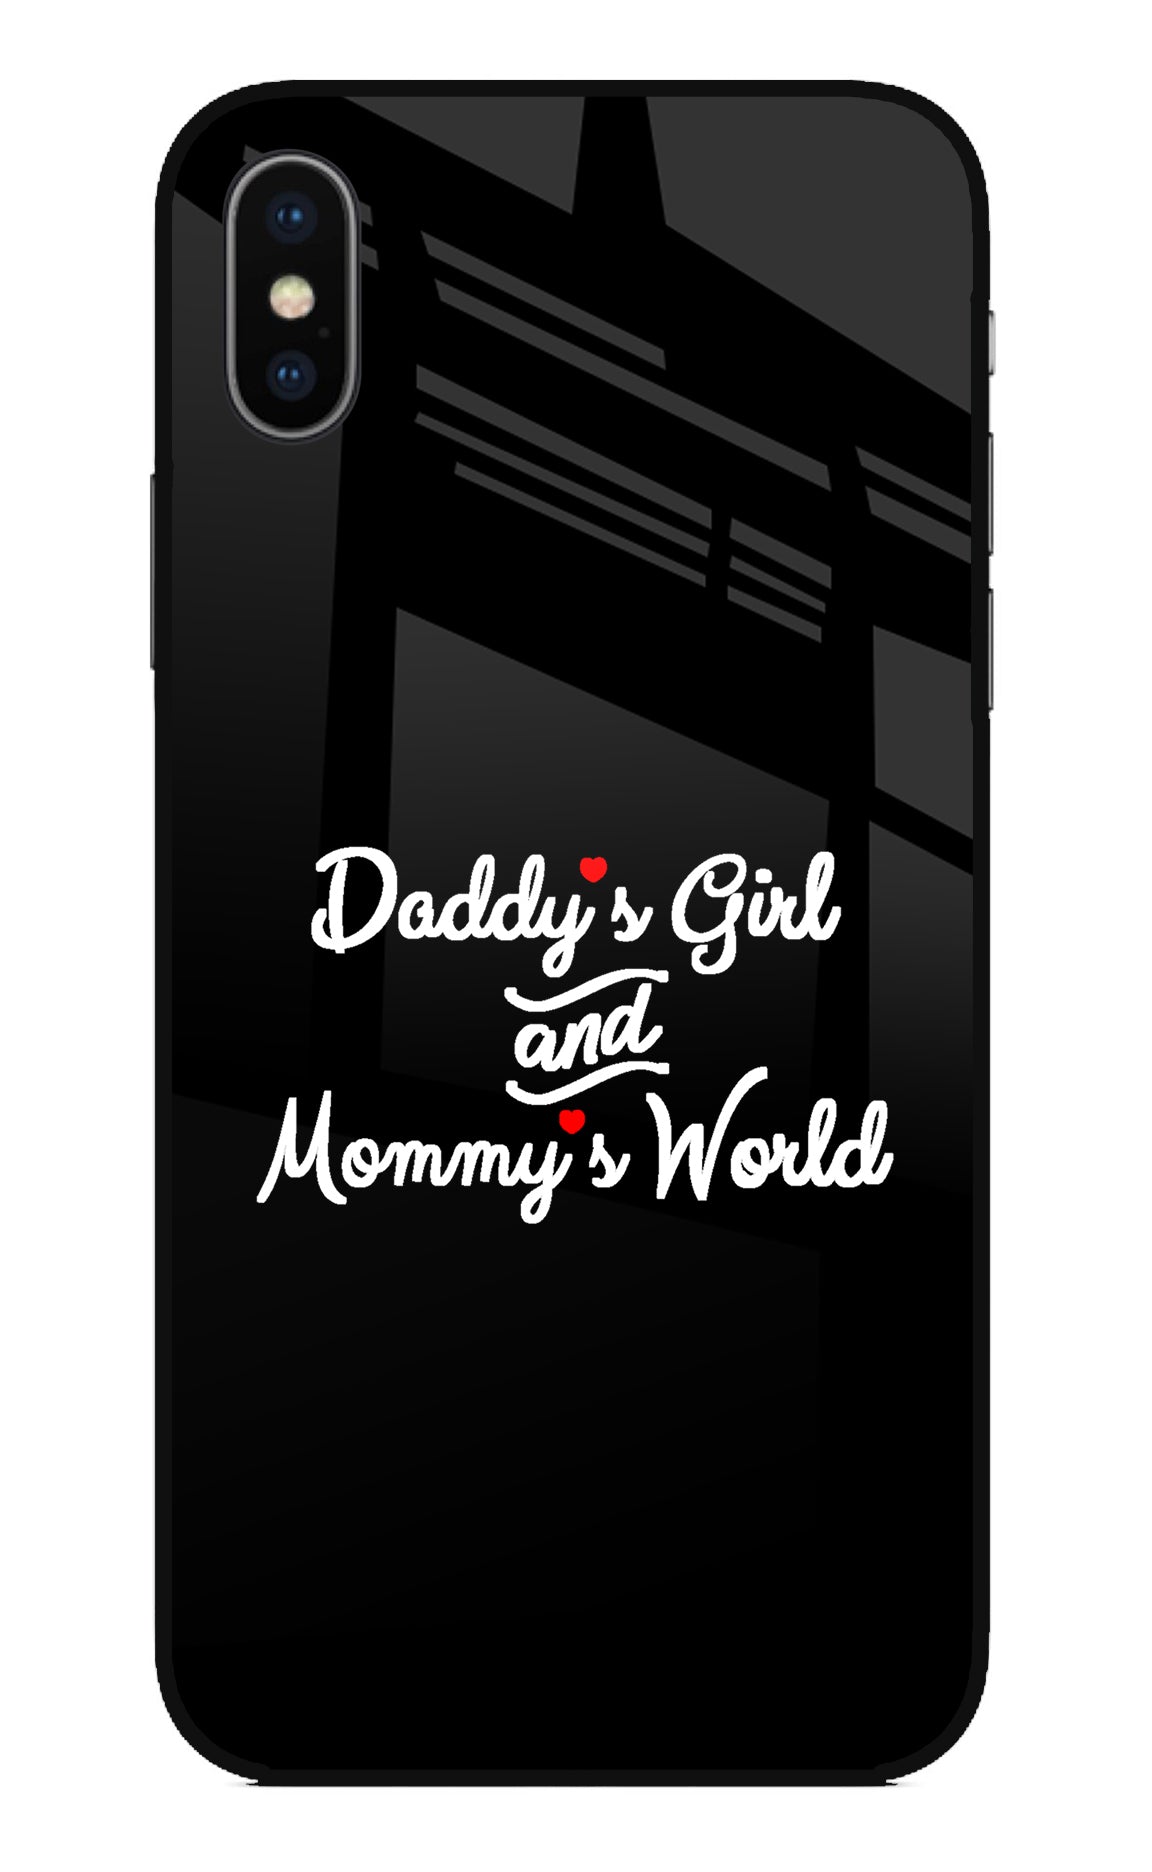 Daddy's Girl and Mommy's World iPhone X Back Cover